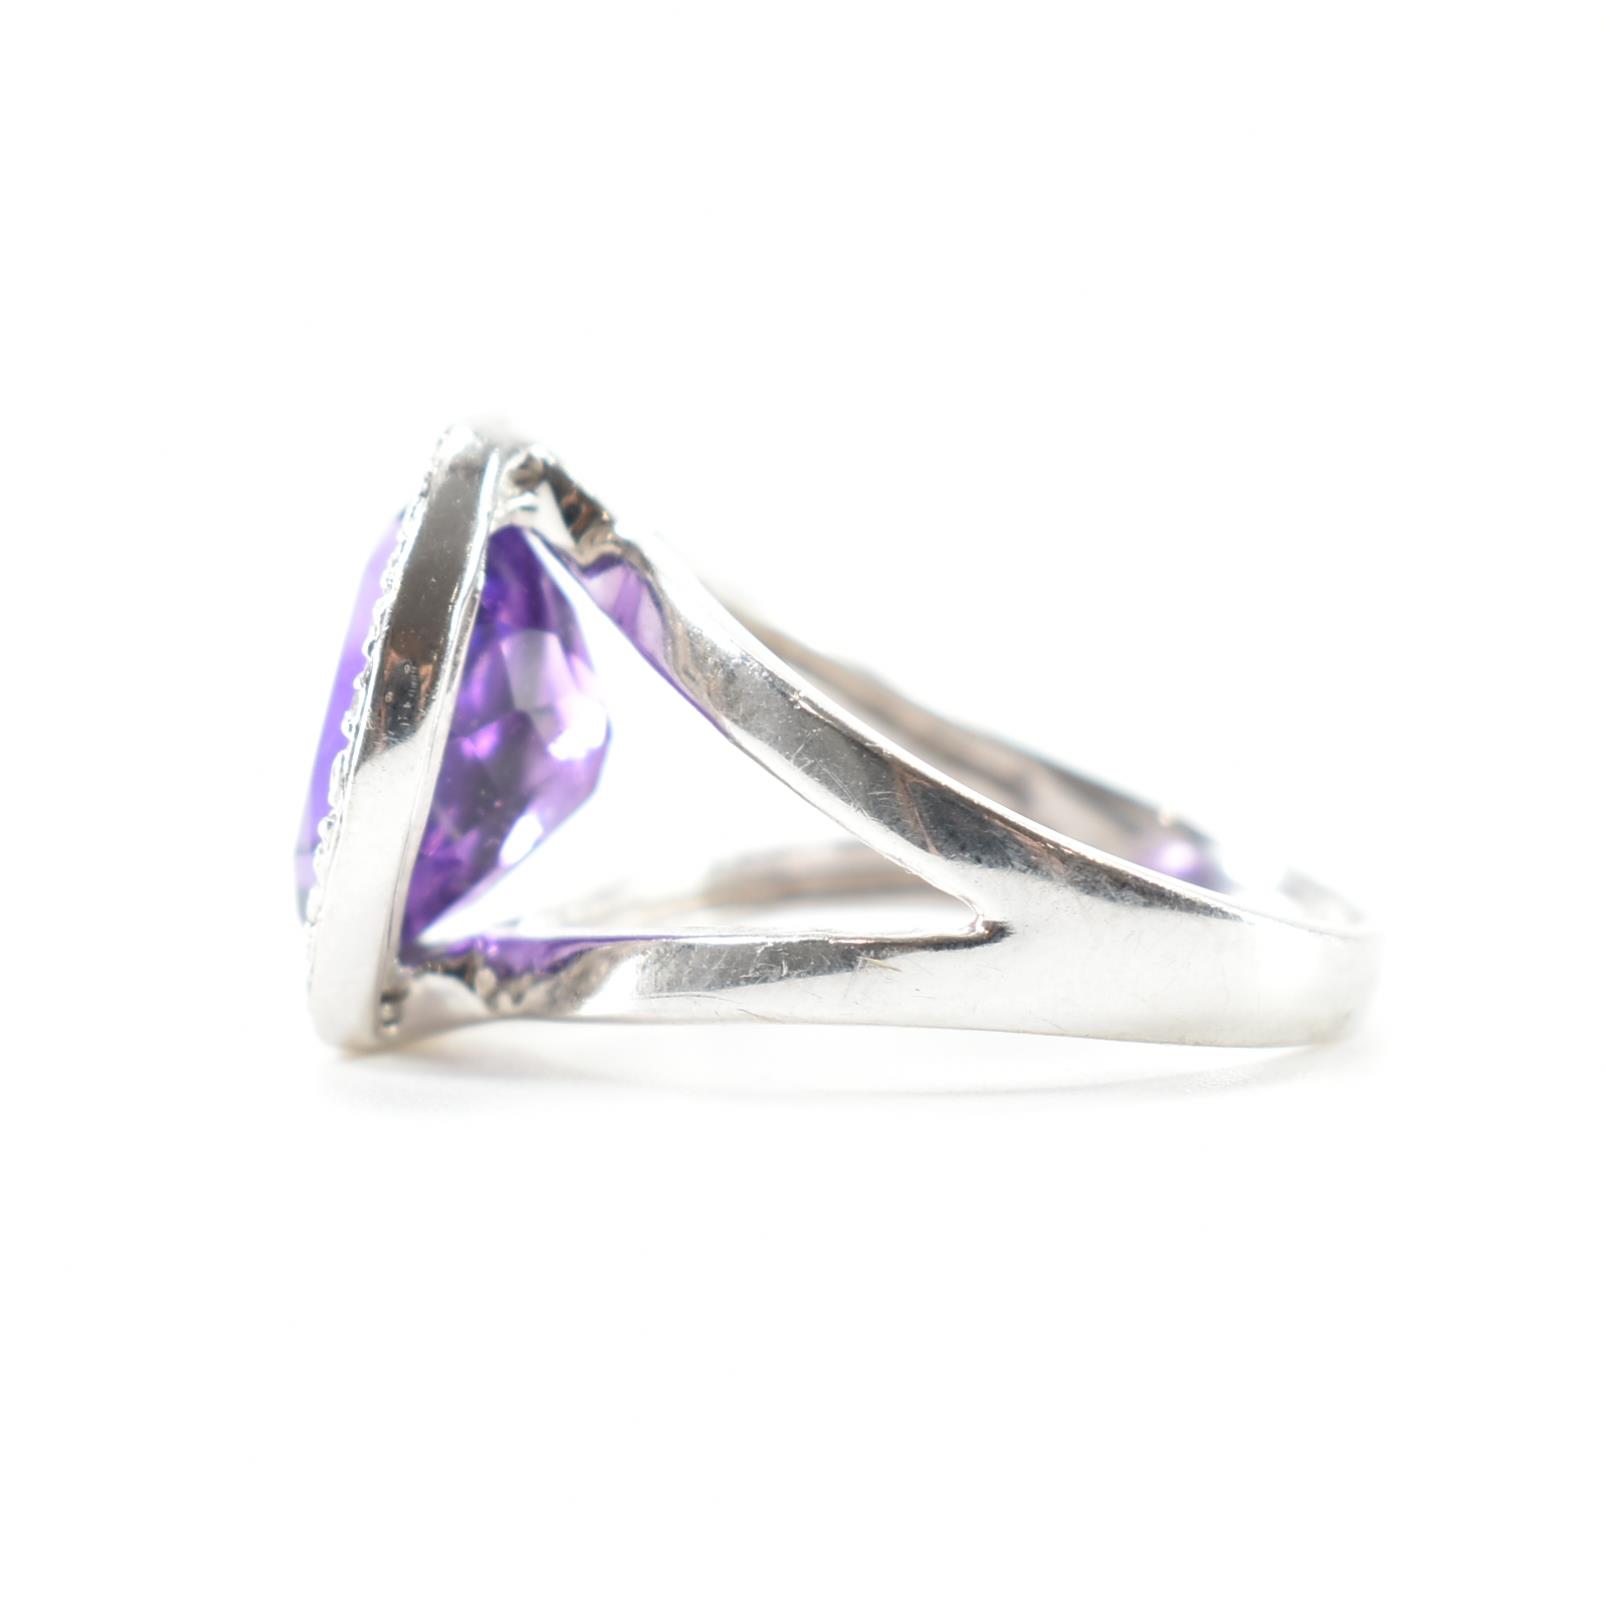 WITHDRAWN - FRENCH 18CT WHITE GOLD AMETHYST & DIAMOND COCKTAIL RING - Image 2 of 8